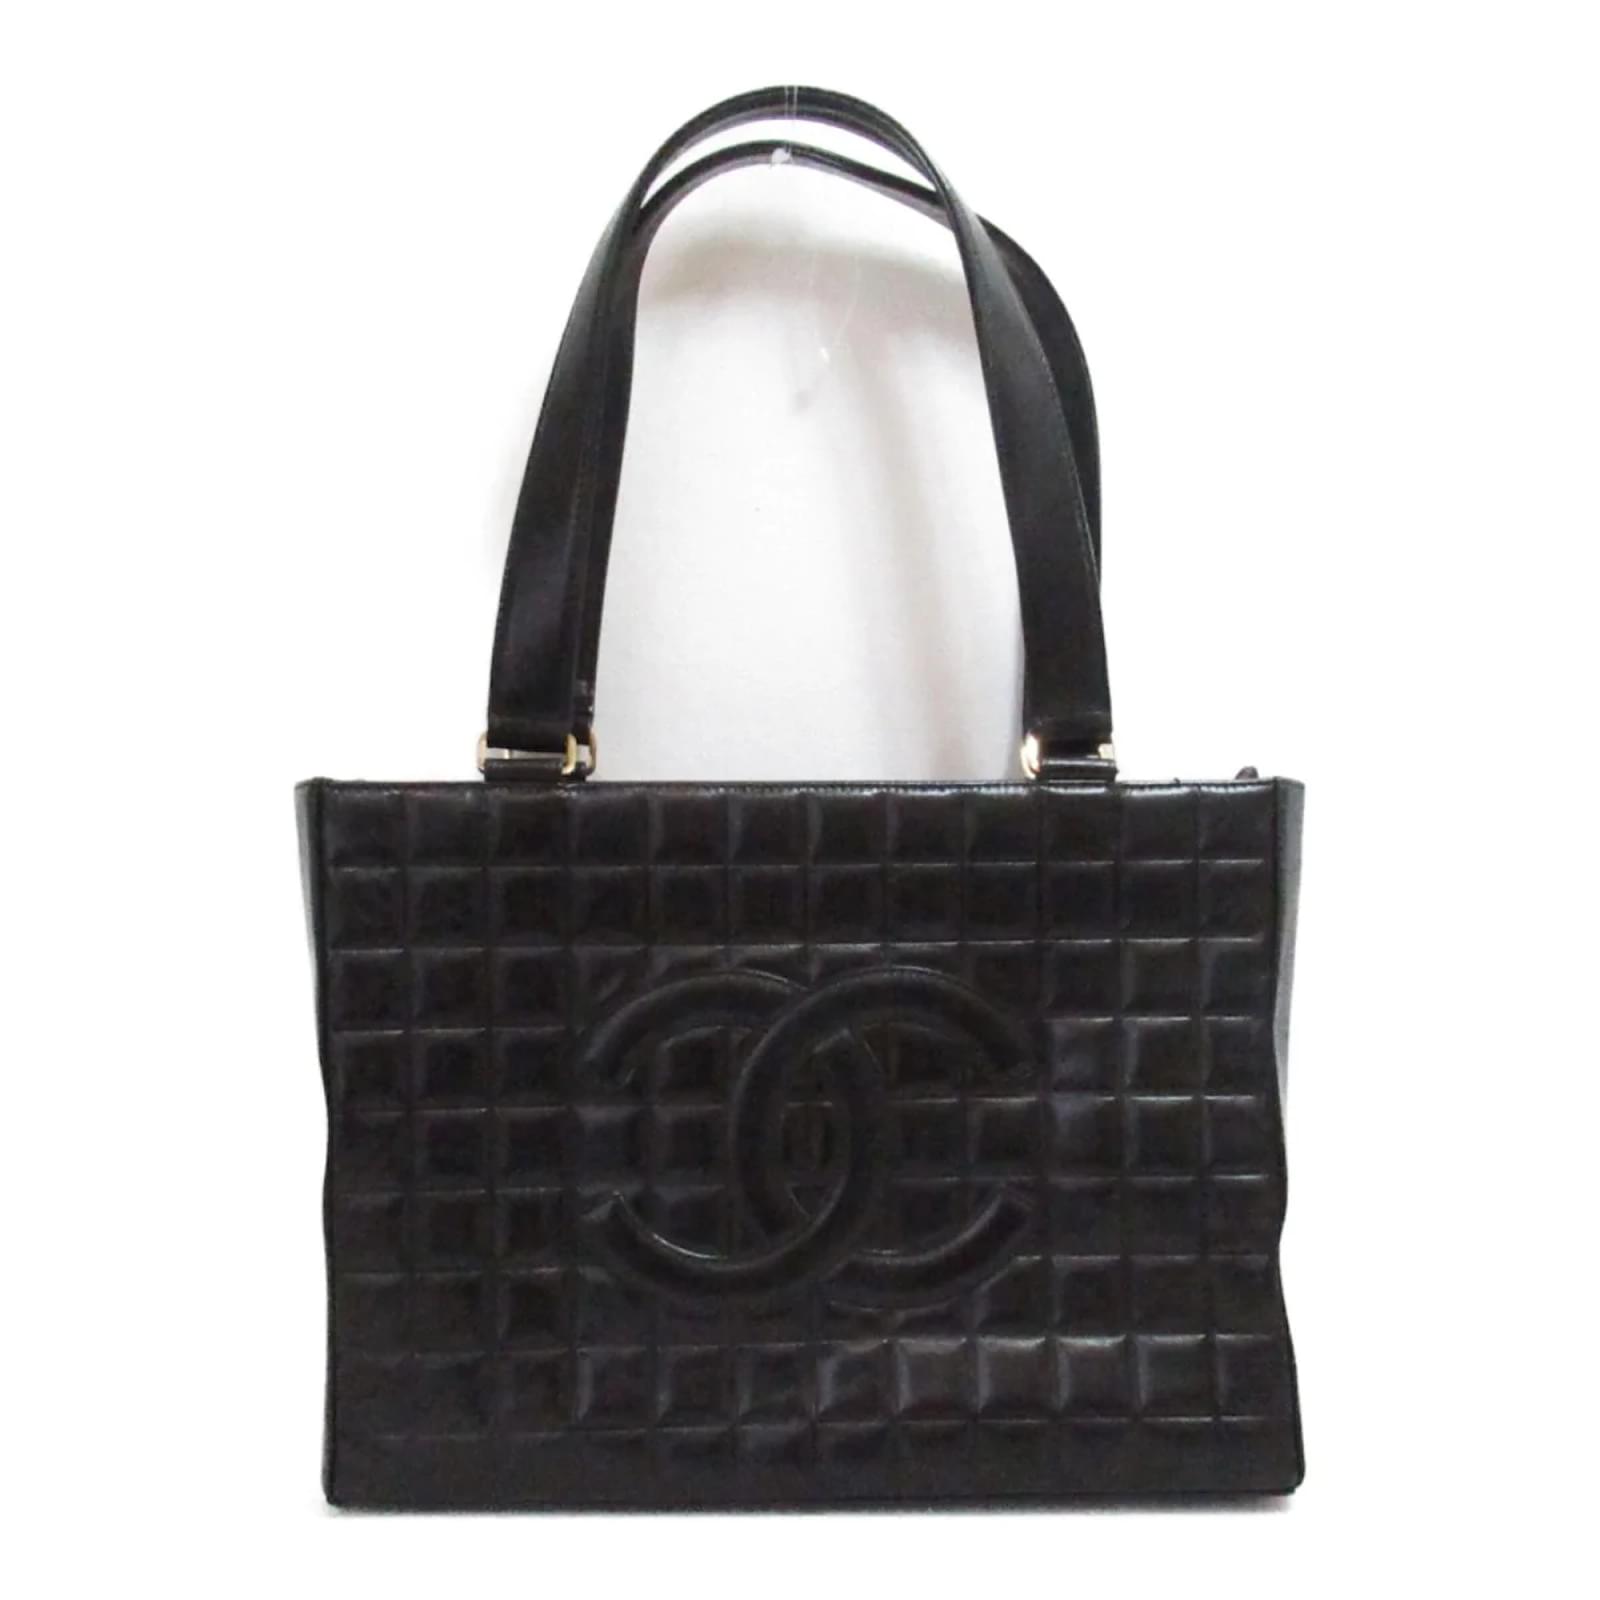 Chanel Choco Bar Quilted Leather Accordion Flap bag Black Pony